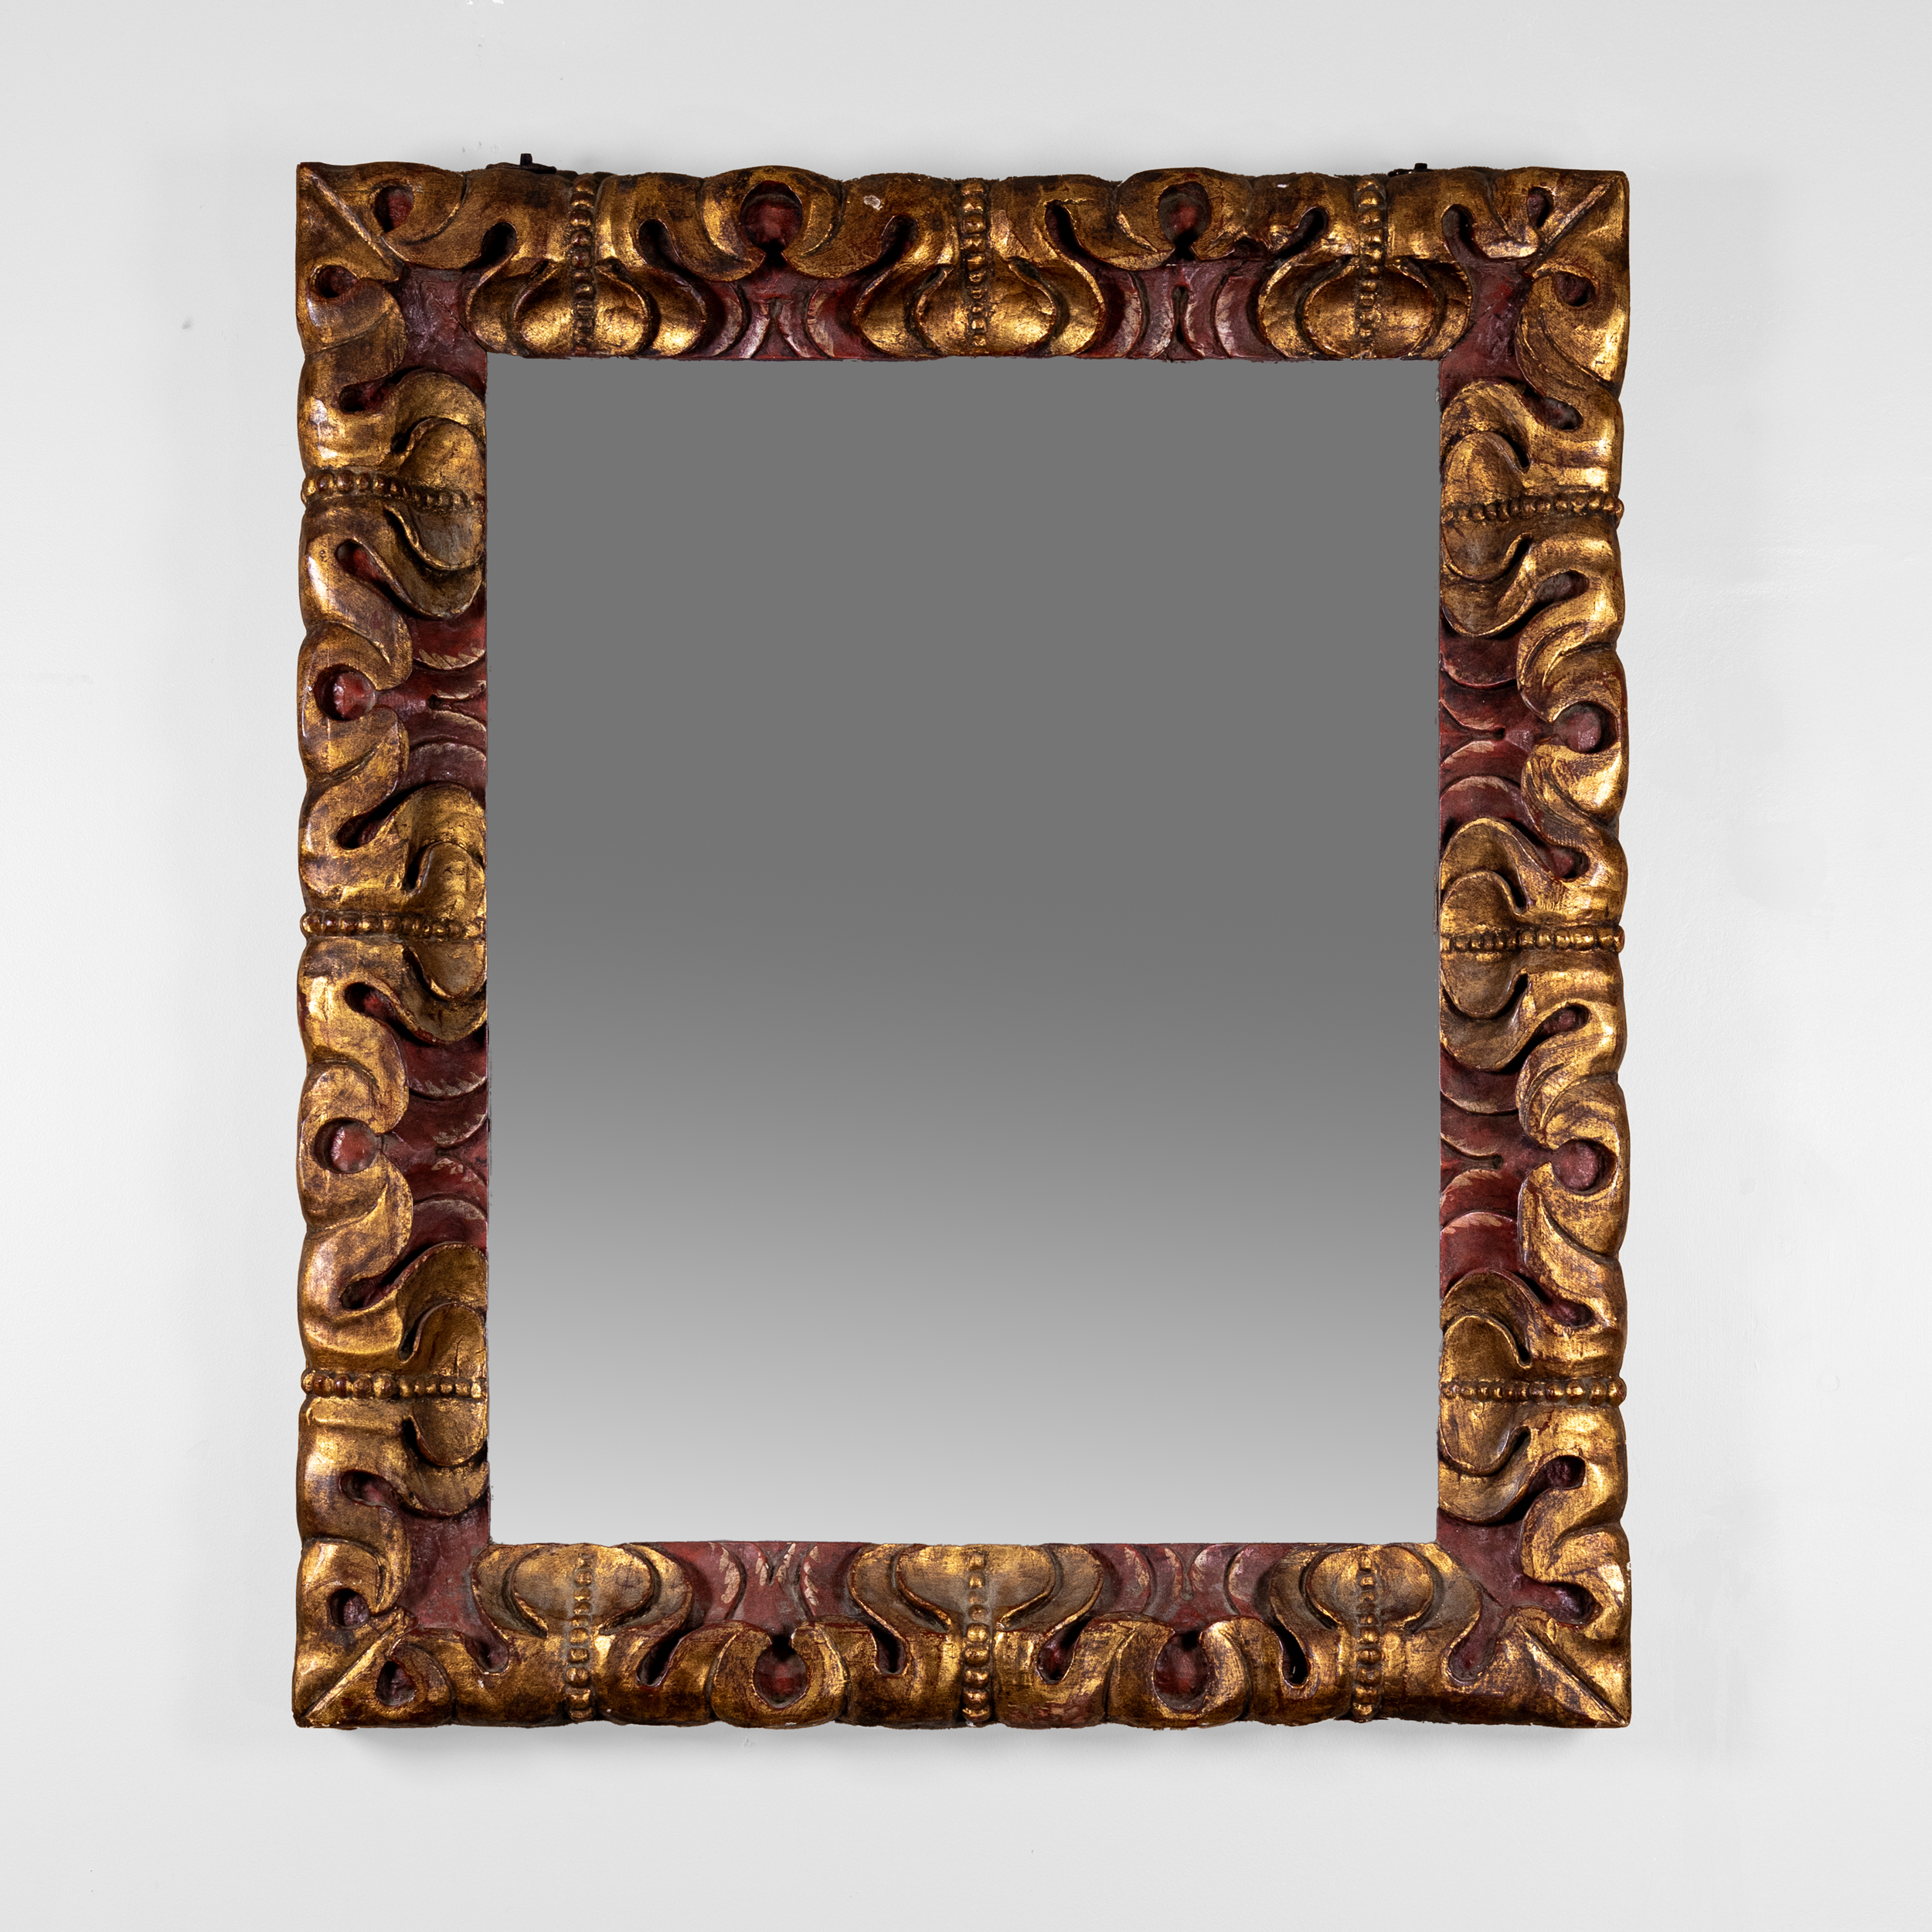 Deeply Carved Giltwood and Red Painted Mirror Frame with Original Mercury Plate, Spain Circa 1900